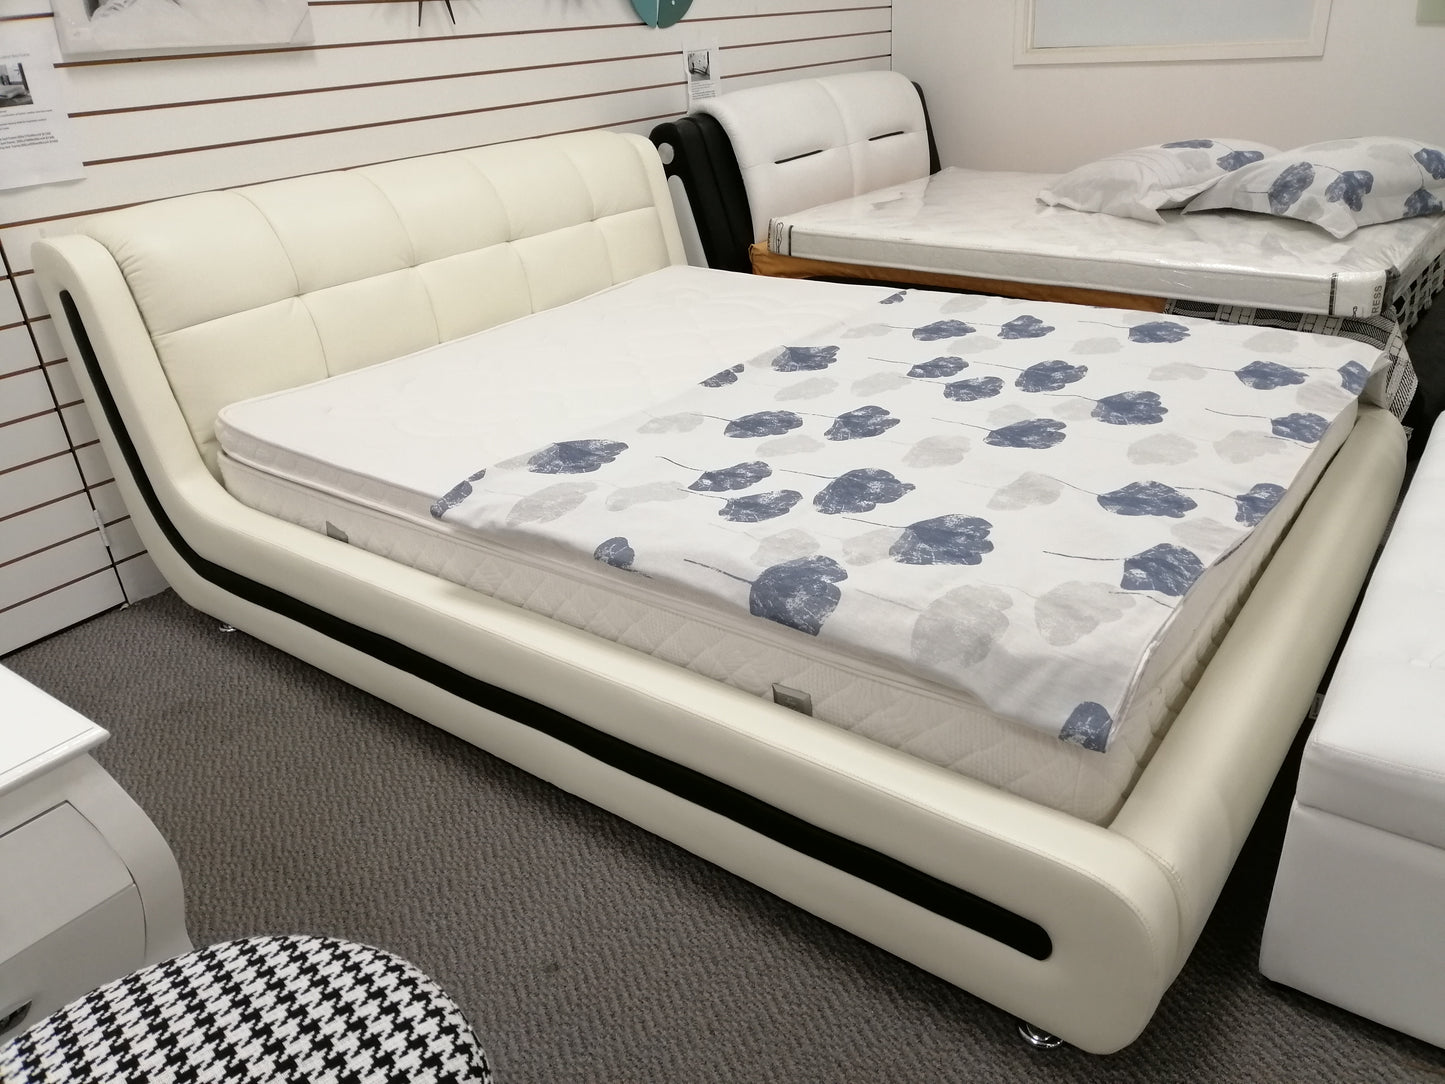 High Quality Italian Leather Bed Frame #031, CLEARANCE SALE